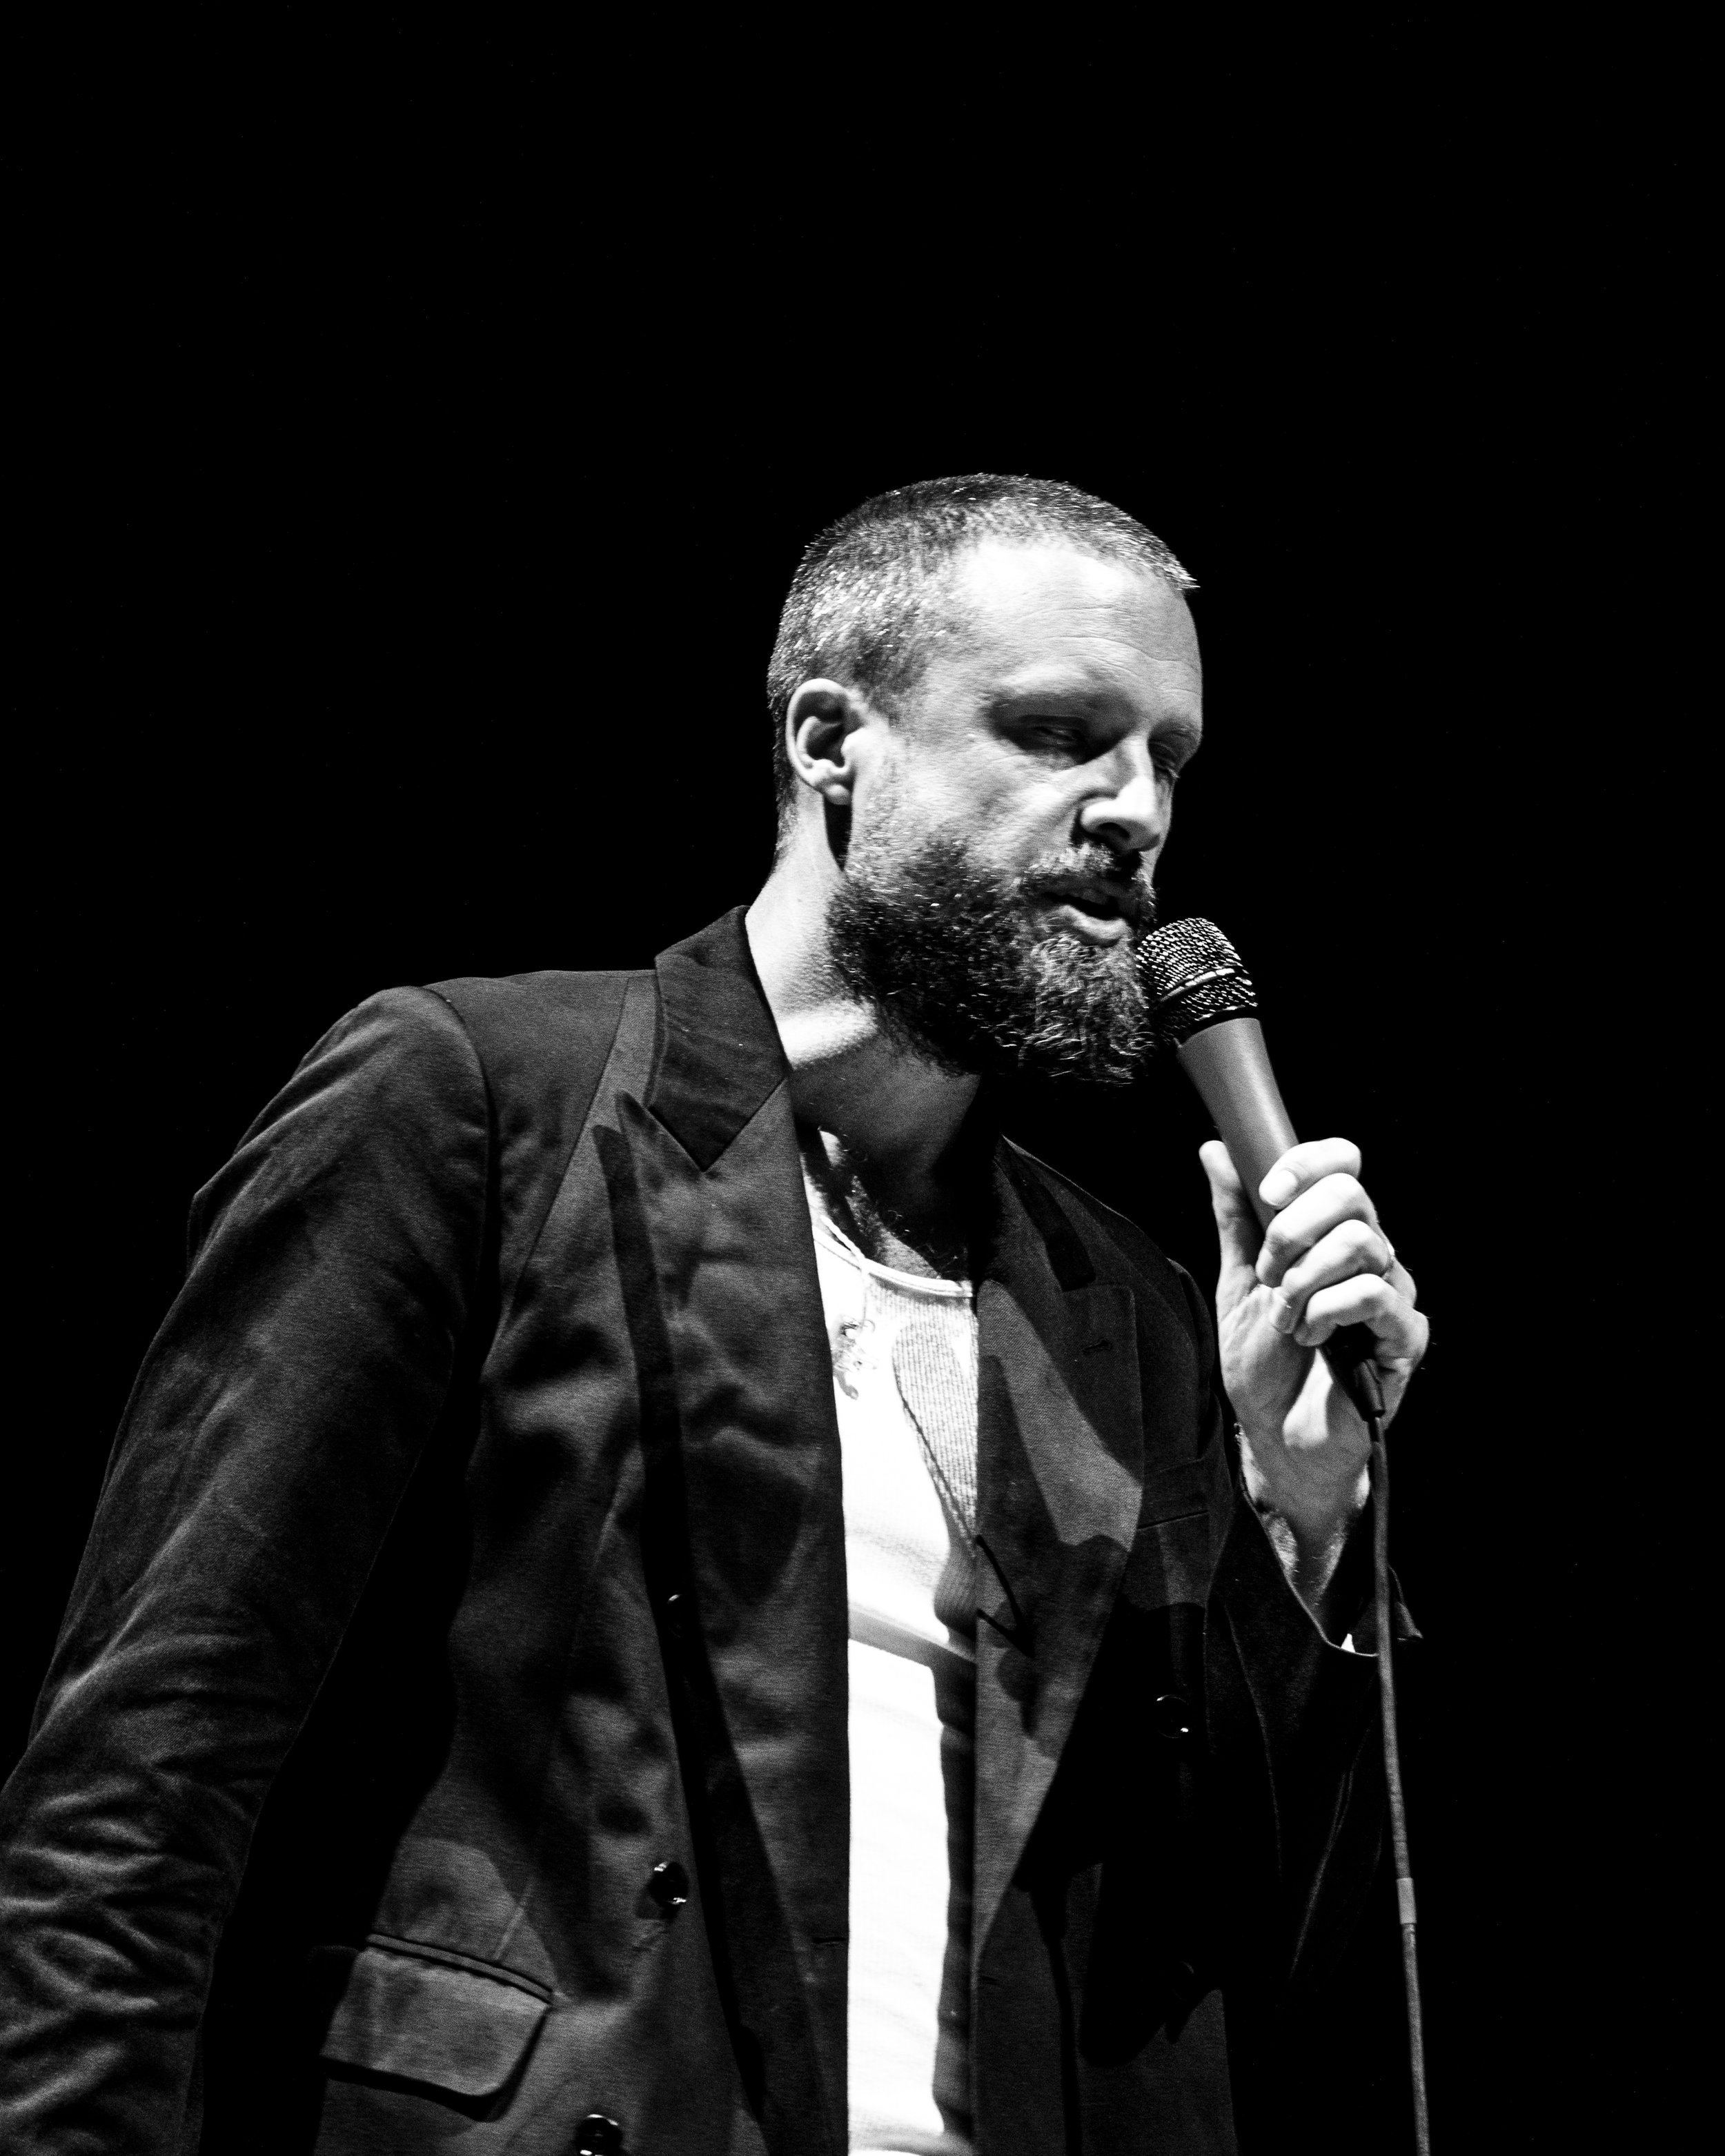 FATHER JOHN MISTY WITH THE COLORADO SYMPHONY - Red Rocks Amphitheatre - Morrison, Colorado - Sunday, July 31, 2022 - PHOTO BY Mowgli Miles of Interracial Friends-4.JPG